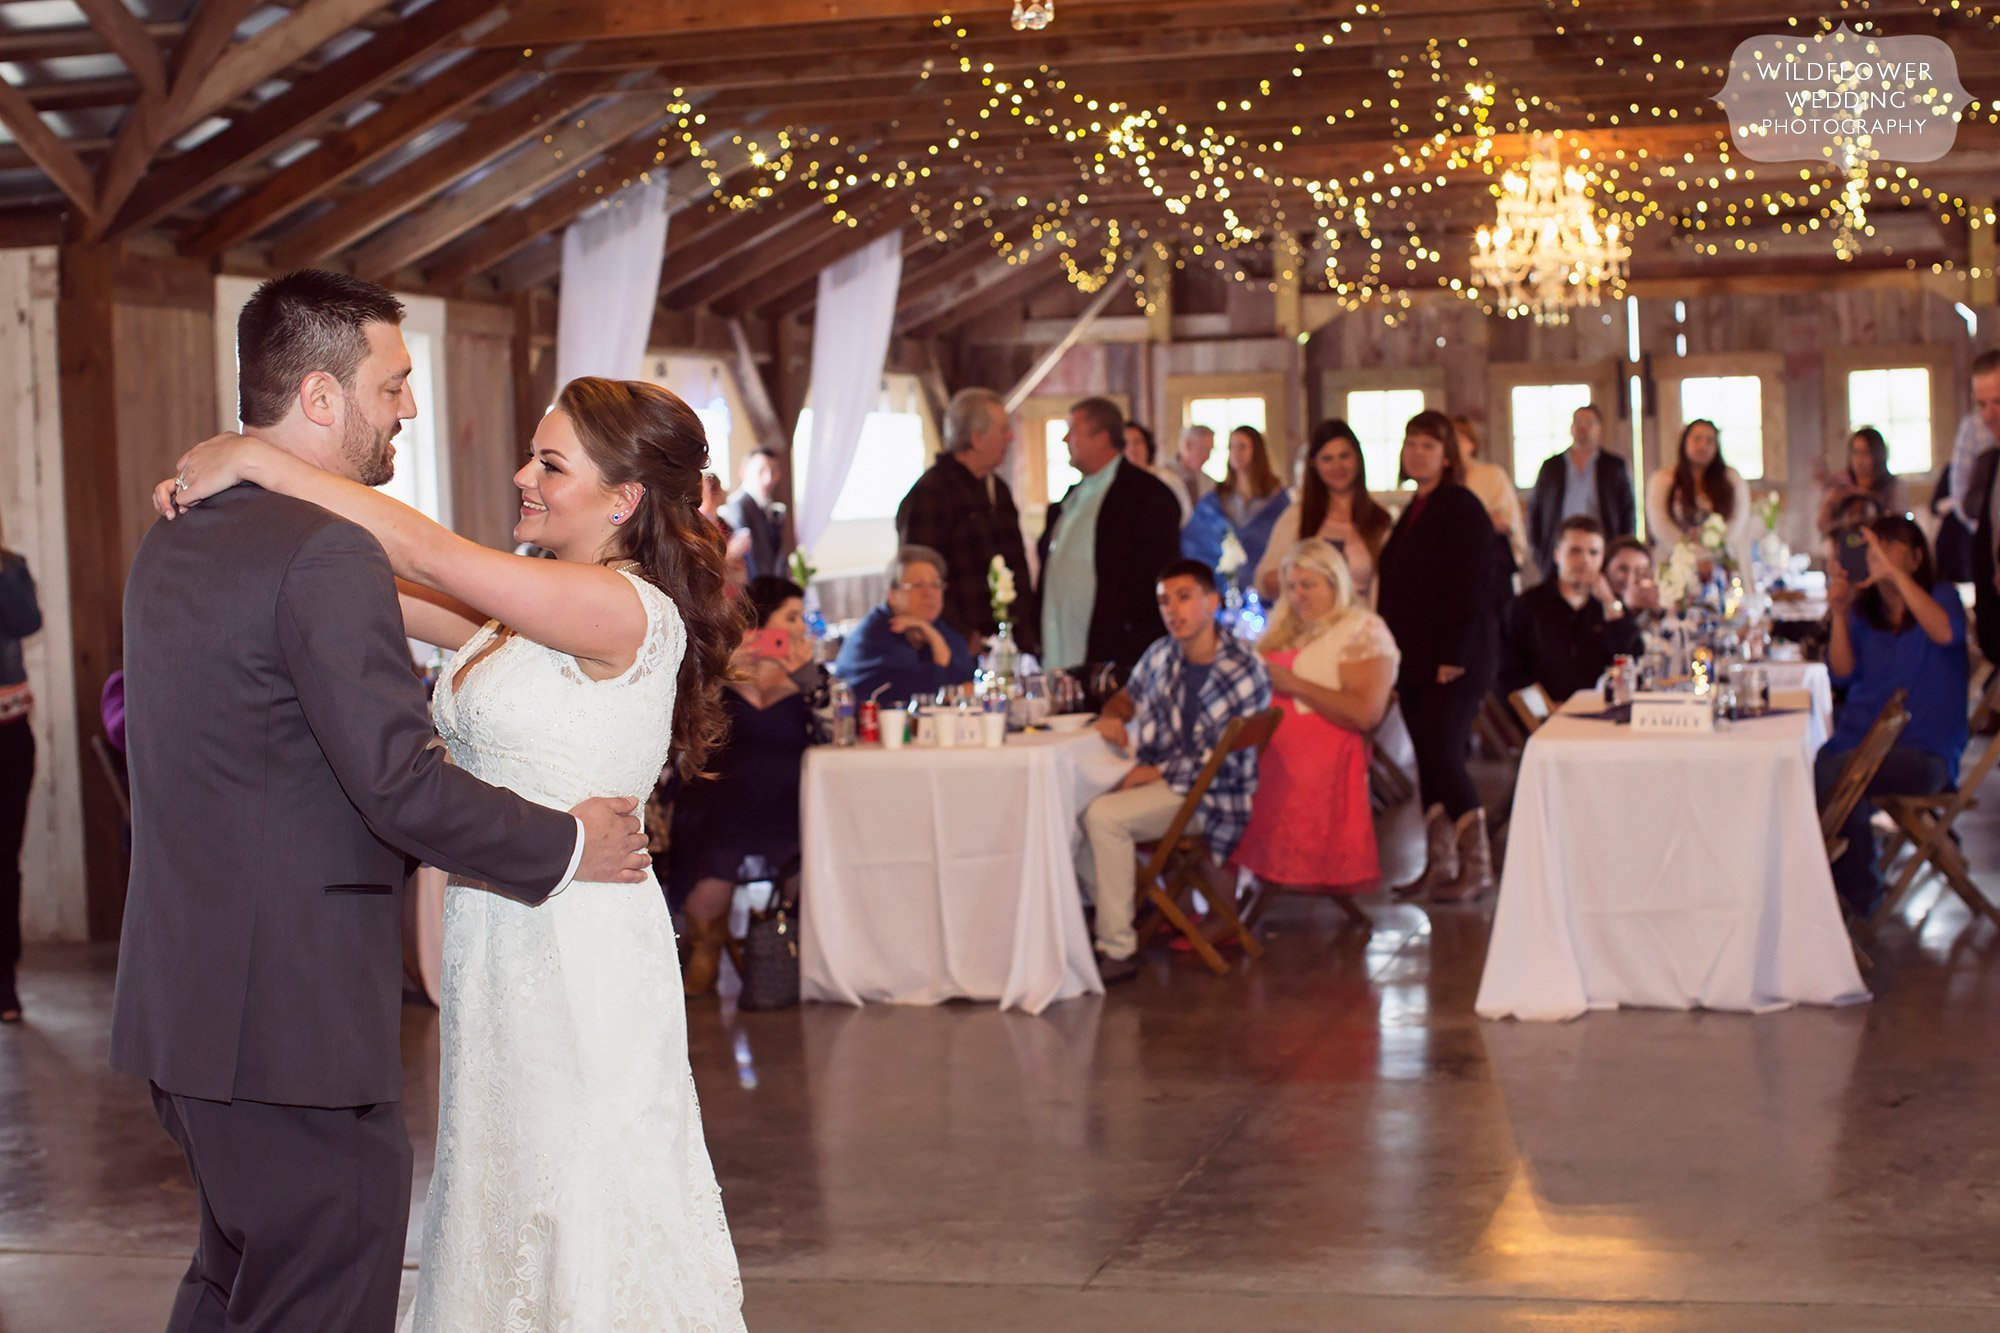 First dance under twinkle lights in the red barn in Weston, MO.